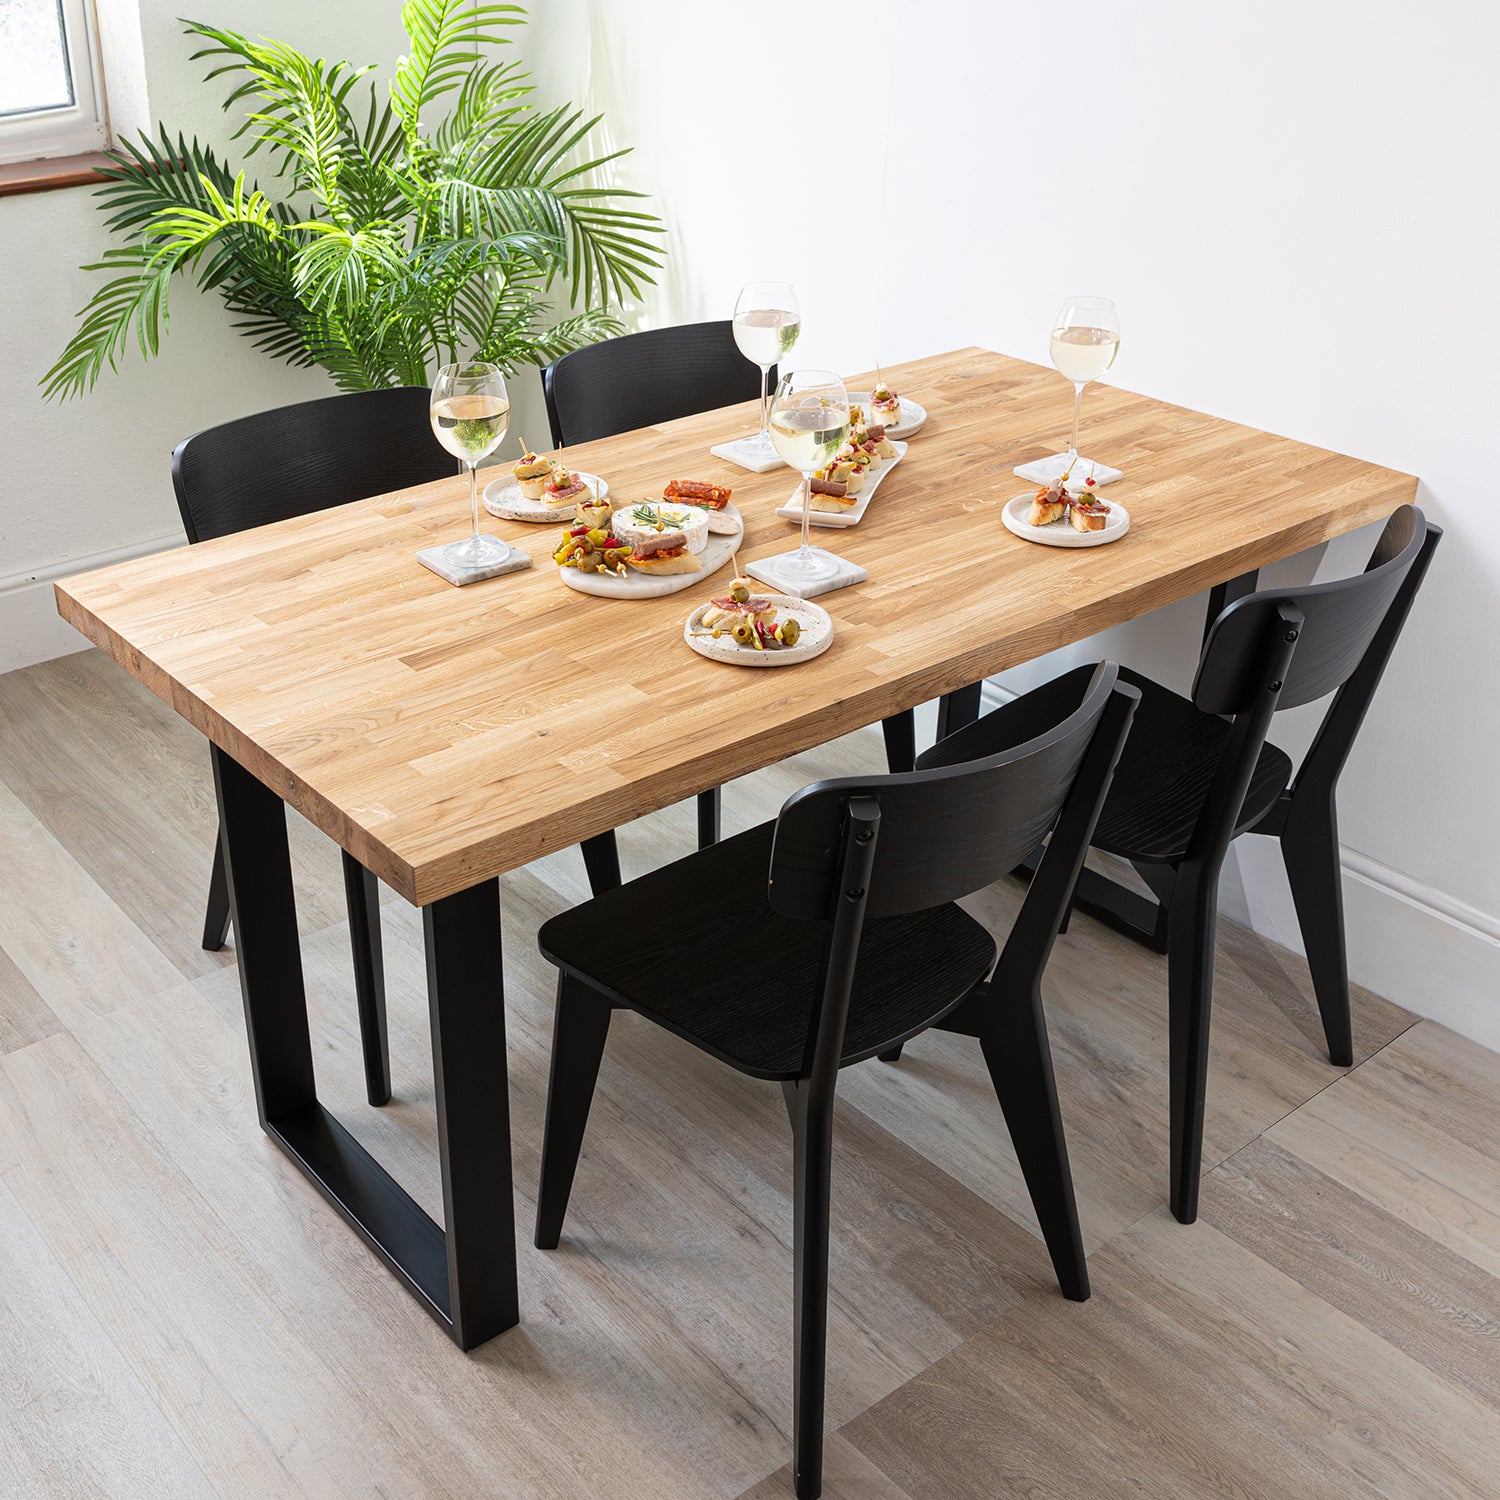 Oak Solid Wood Table with Square Metal Legs